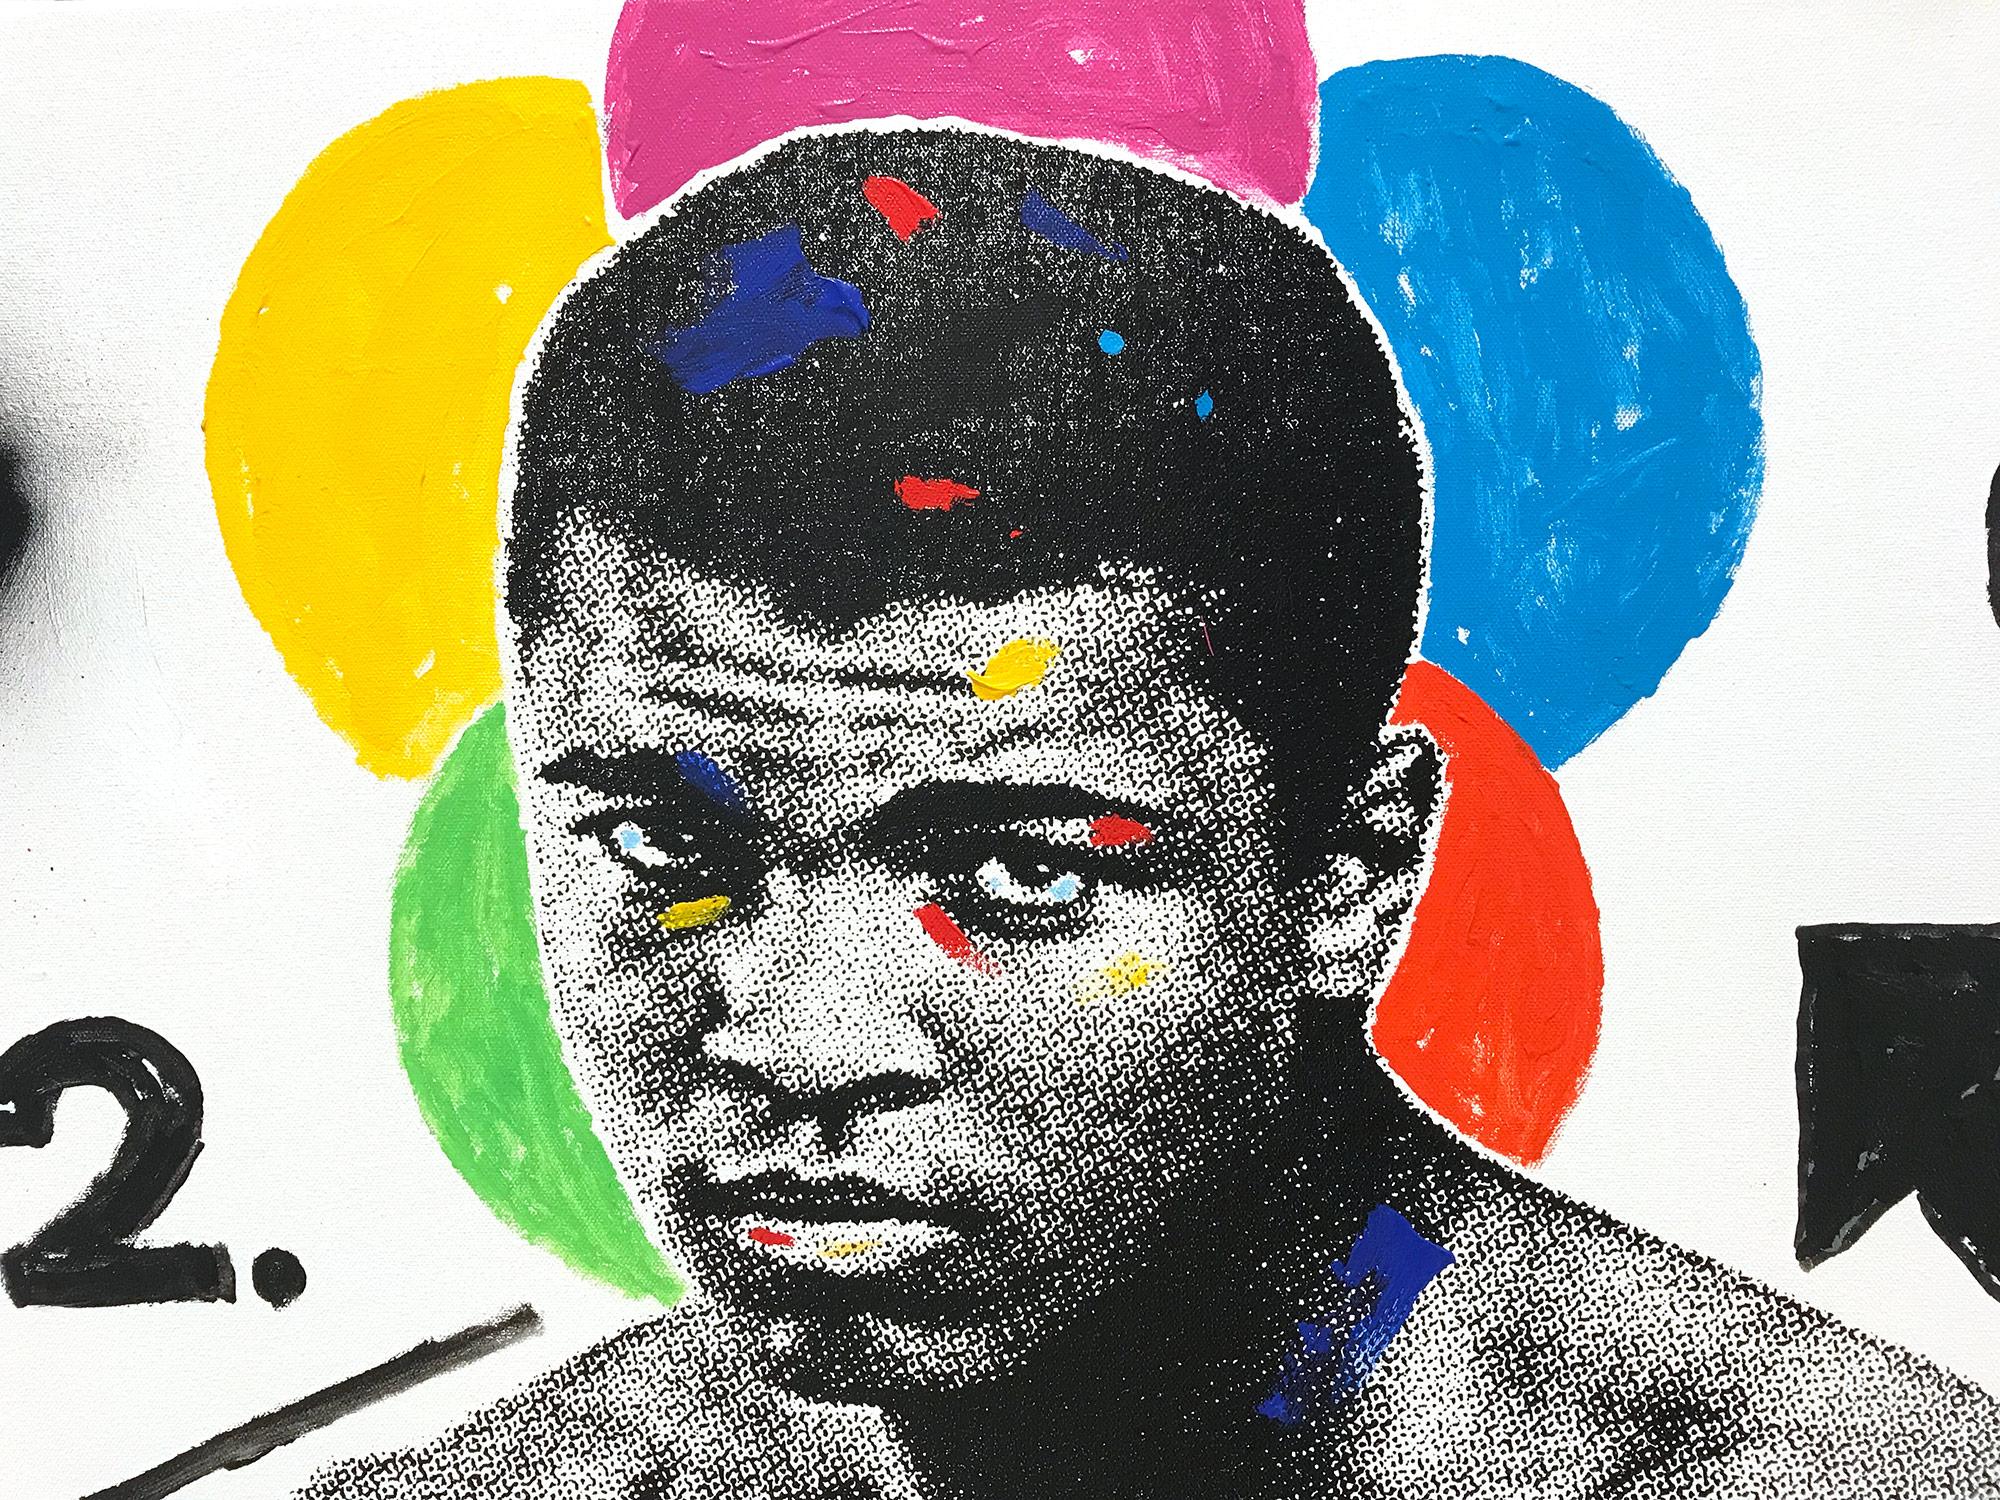 A pop piece depicting Muhammed Ali with Chanel. With impasto painting, and quick brushwork we are drawn to the movement, as the artist is able to engage his viewer with contrasting highlights and shadow. Done with Silkscreen in artist studio with